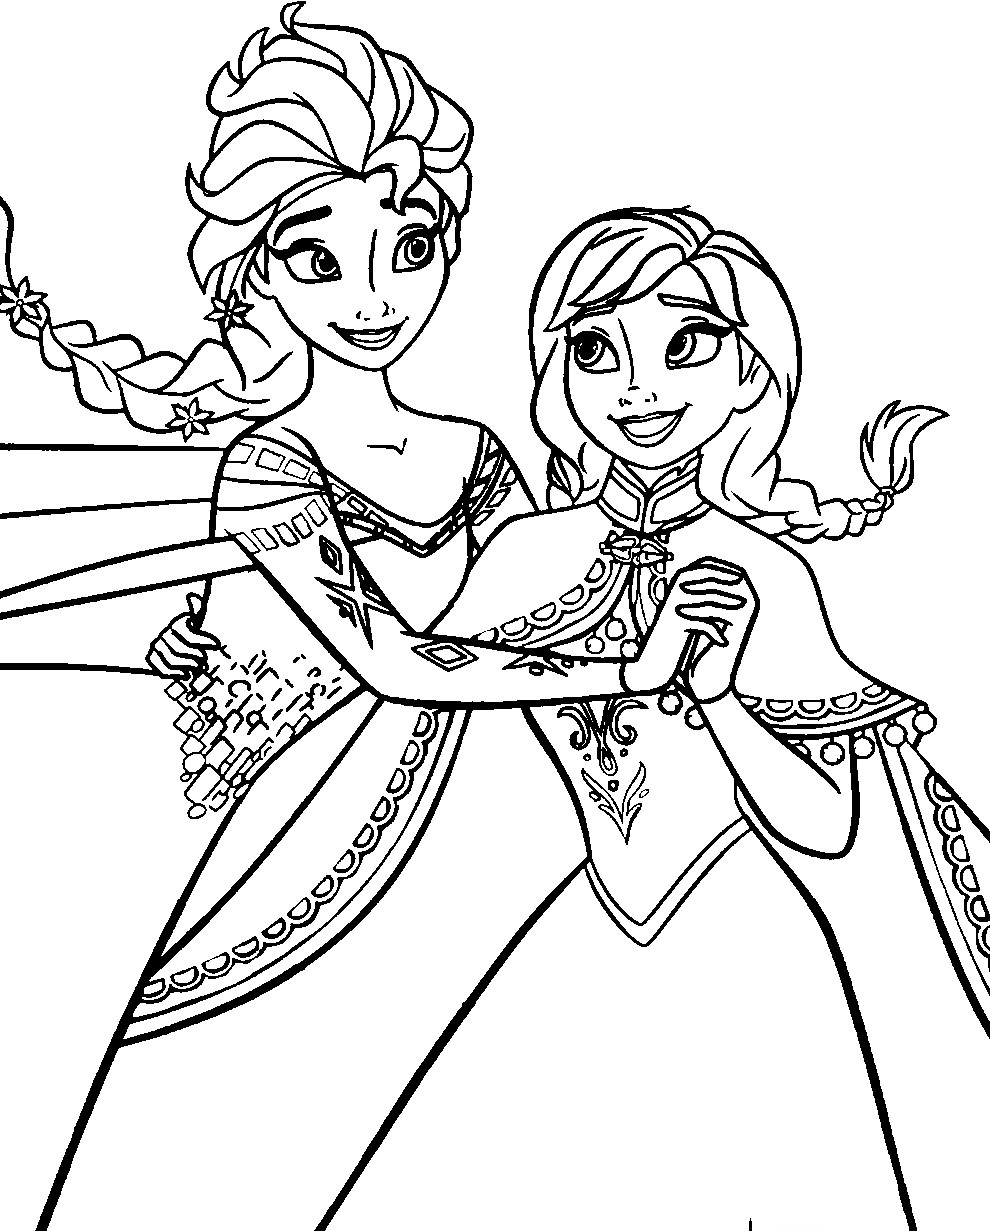 Disney Frozen Coloring Pages
 Disney Frozen Coloring Pages To Download